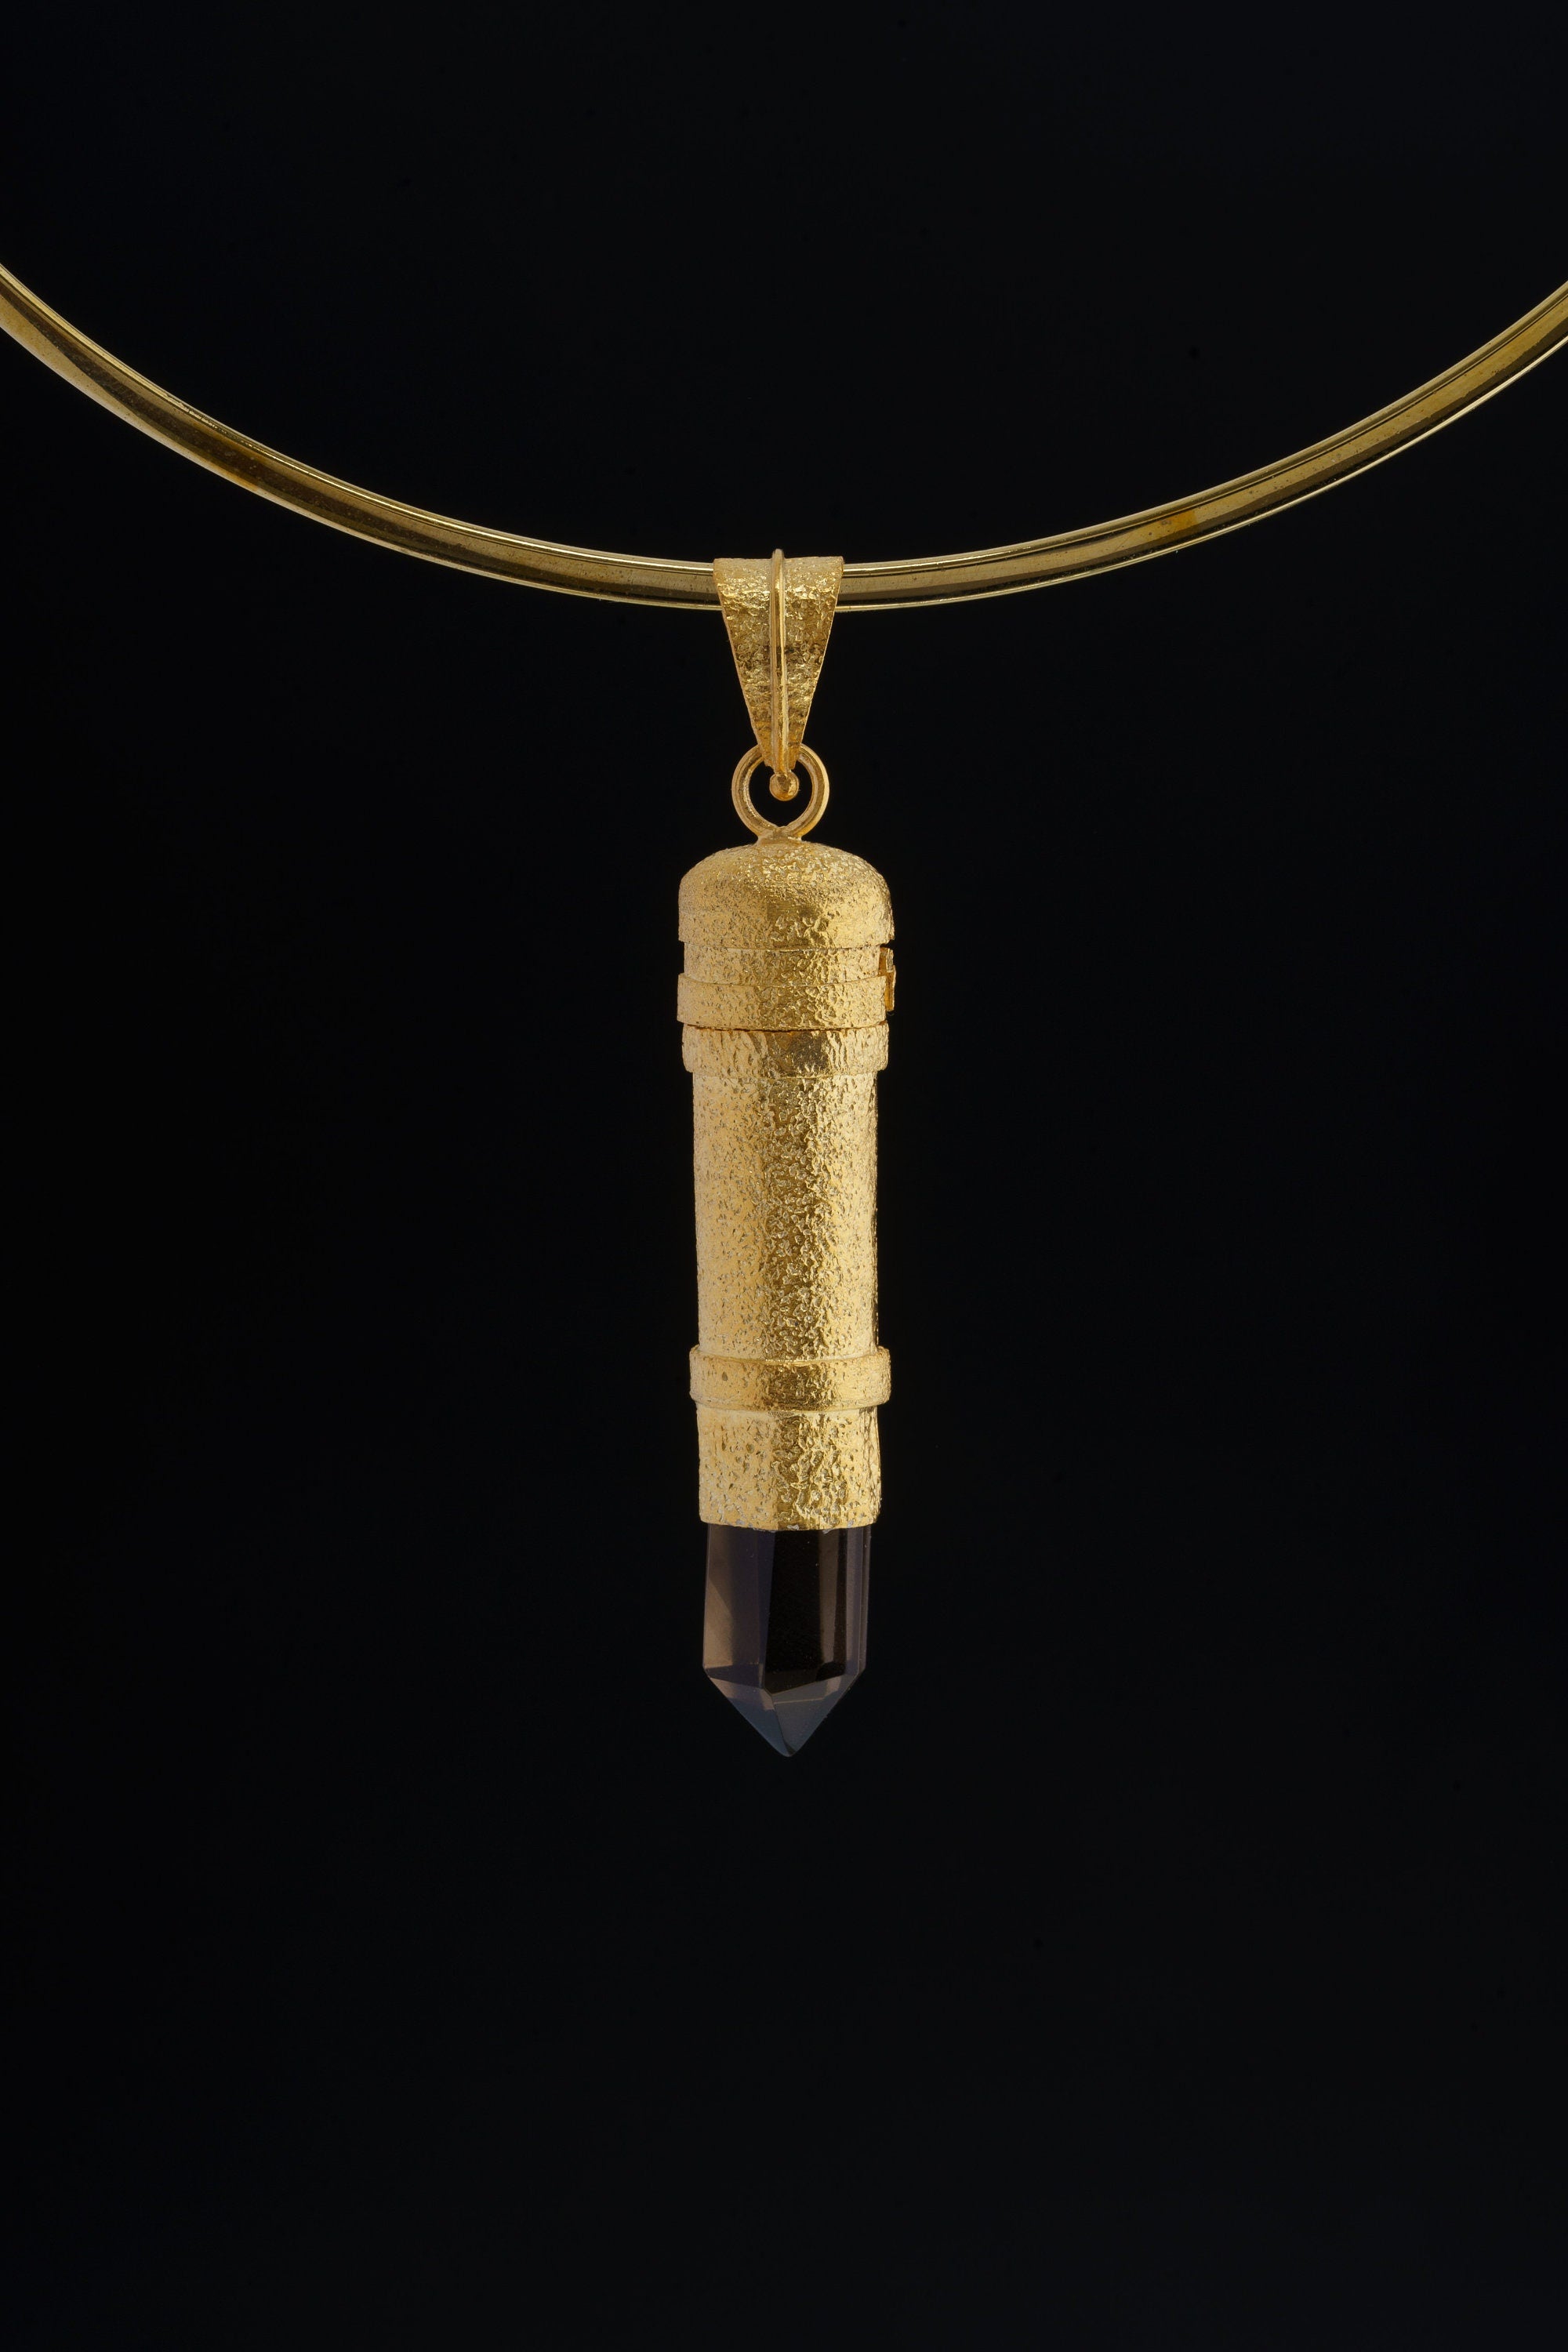 Cut Smoky Generator Quartz - Sizable Solid Capsule Locket - Stash Urn - Textured & Gold Plated Sterling Silver Pendant - No 20